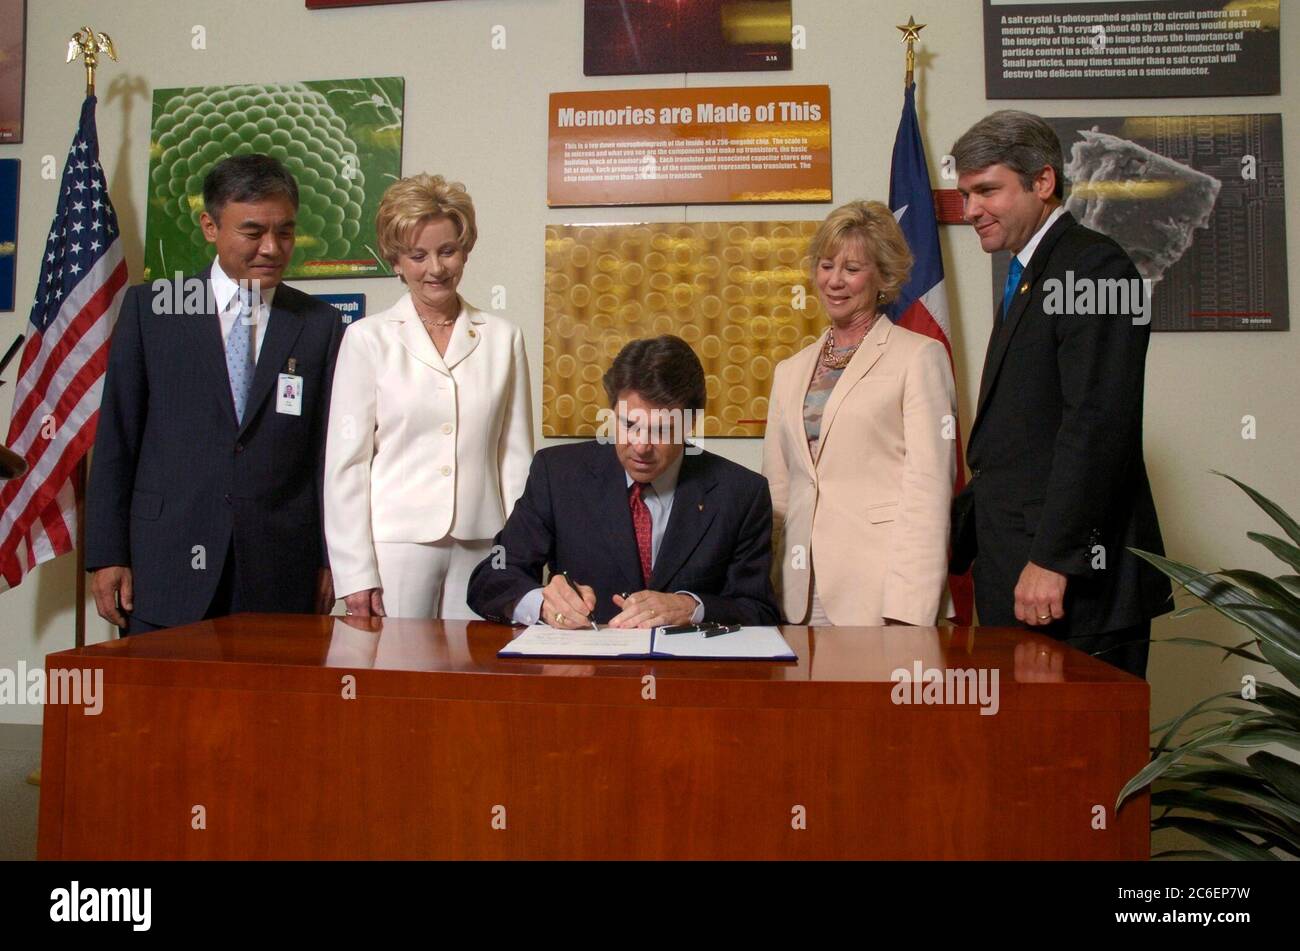 Austin, Texas USA, June 13, 2005: Texas Governor Rick Perry (center, seated) signs a bill that stimulates investment in Texas's high-tech industry. The bill-signing takes place at the $1.3-billion Samsung semiconductor fabrication plant in suburban north Austin.   Left to right is plant manager H.K. Park, State Rep. Jeanne Morrison, Governor Perry, State Senator Florence Shapiro, and U.S. Rep. Michael McCaul. ©Bob Daemmrich Stock Photo